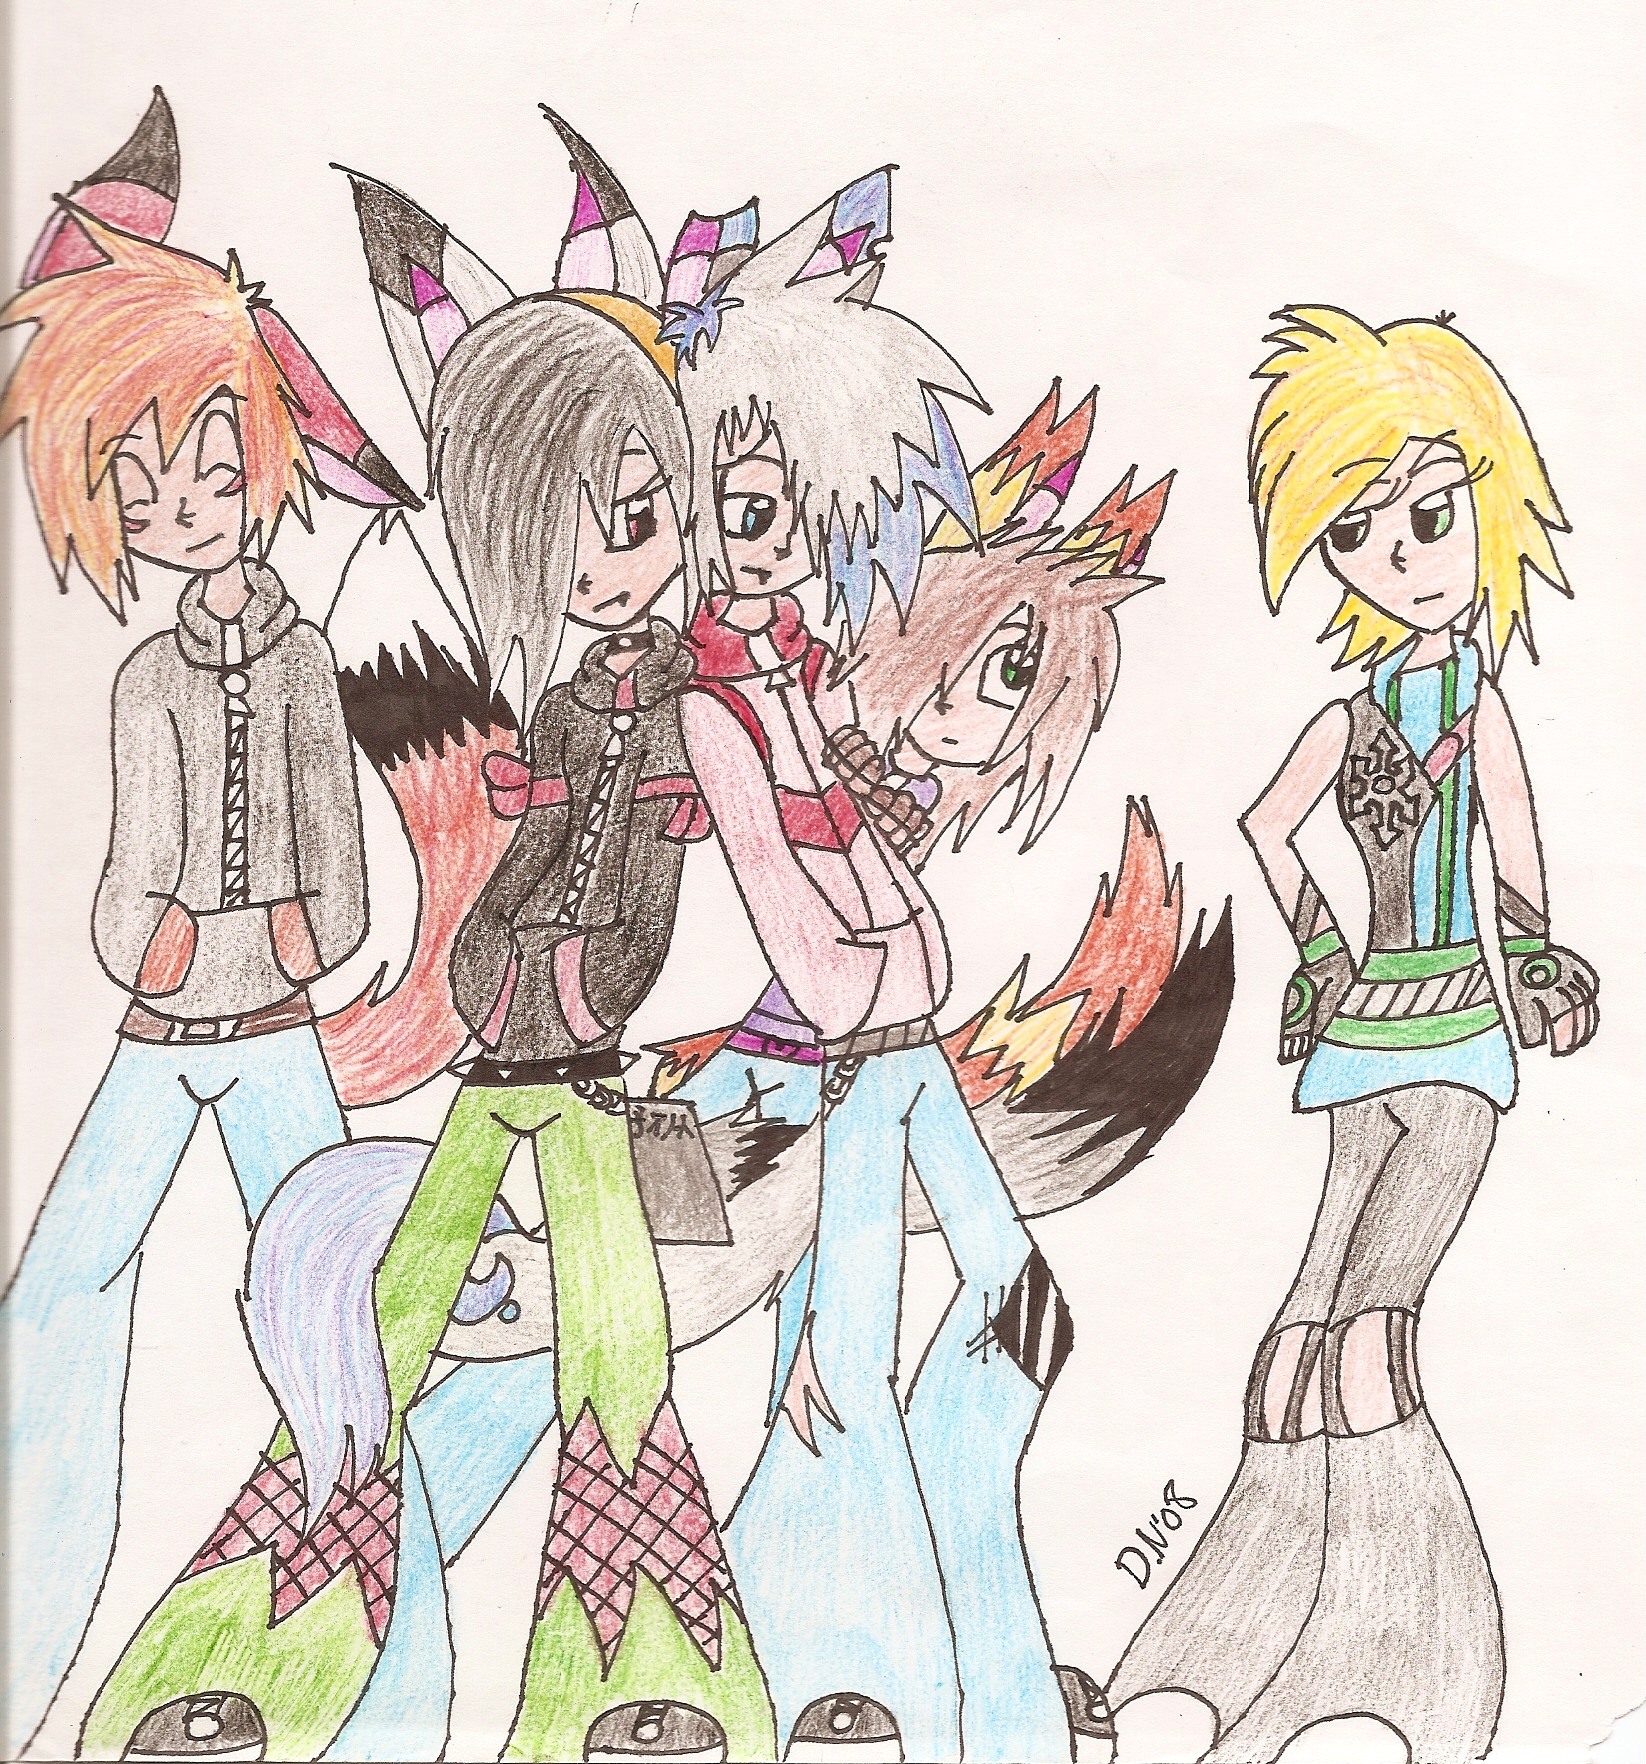 Riley, Yasmin, Rory, Soren, and Rose by desertbreeze